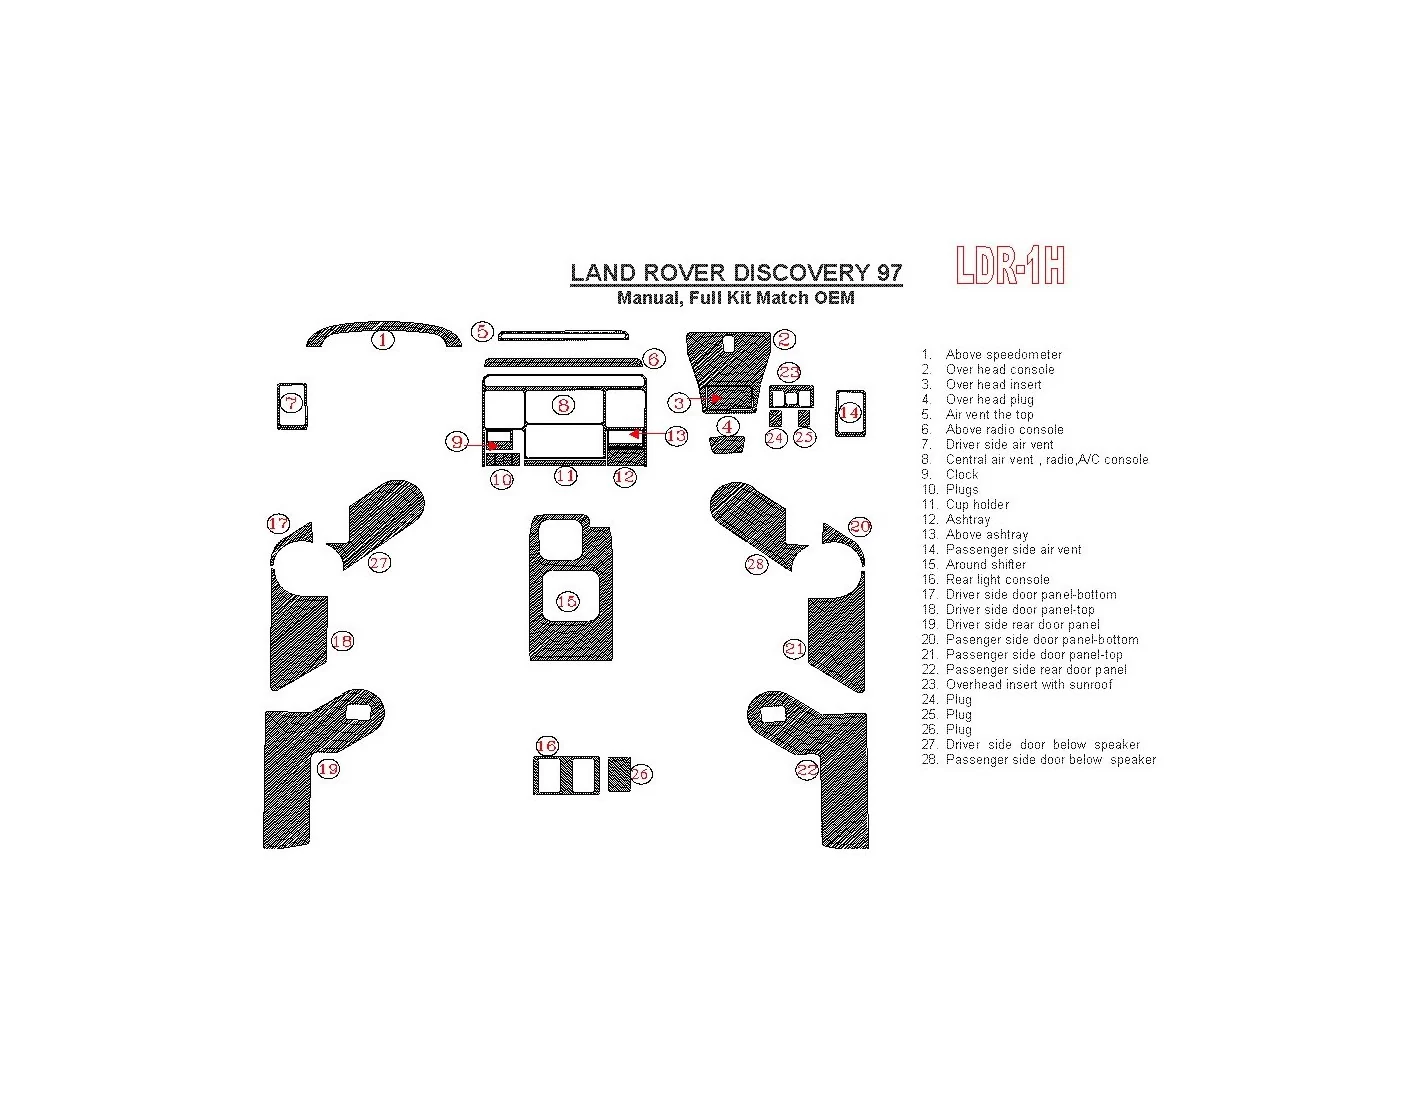 Land Rover Discovery 1997-1997 Manual Gearbox, Full Set, OEM Compliance, 1997 Year Only Interior BD Dash Trim Kit